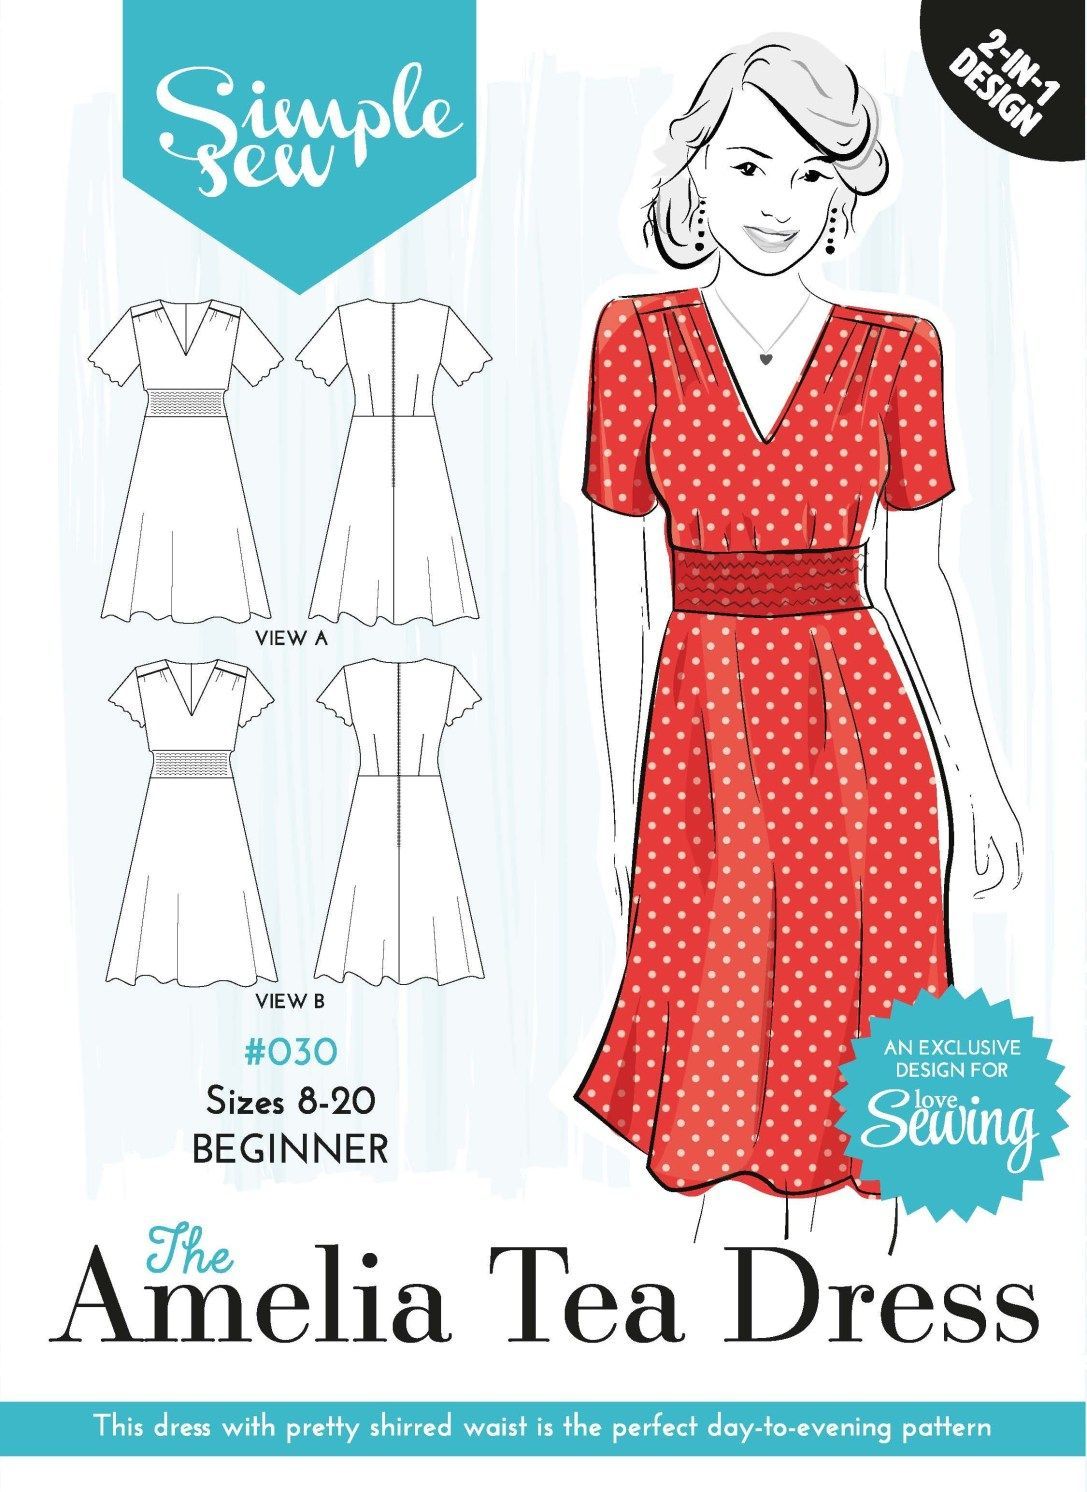 Sewing Patterns Free Free Pattern 30 Amelia Tea Dress Envelope Ol Sewing For Woman -   17 DIY Clothes For Women free pattern
 ideas